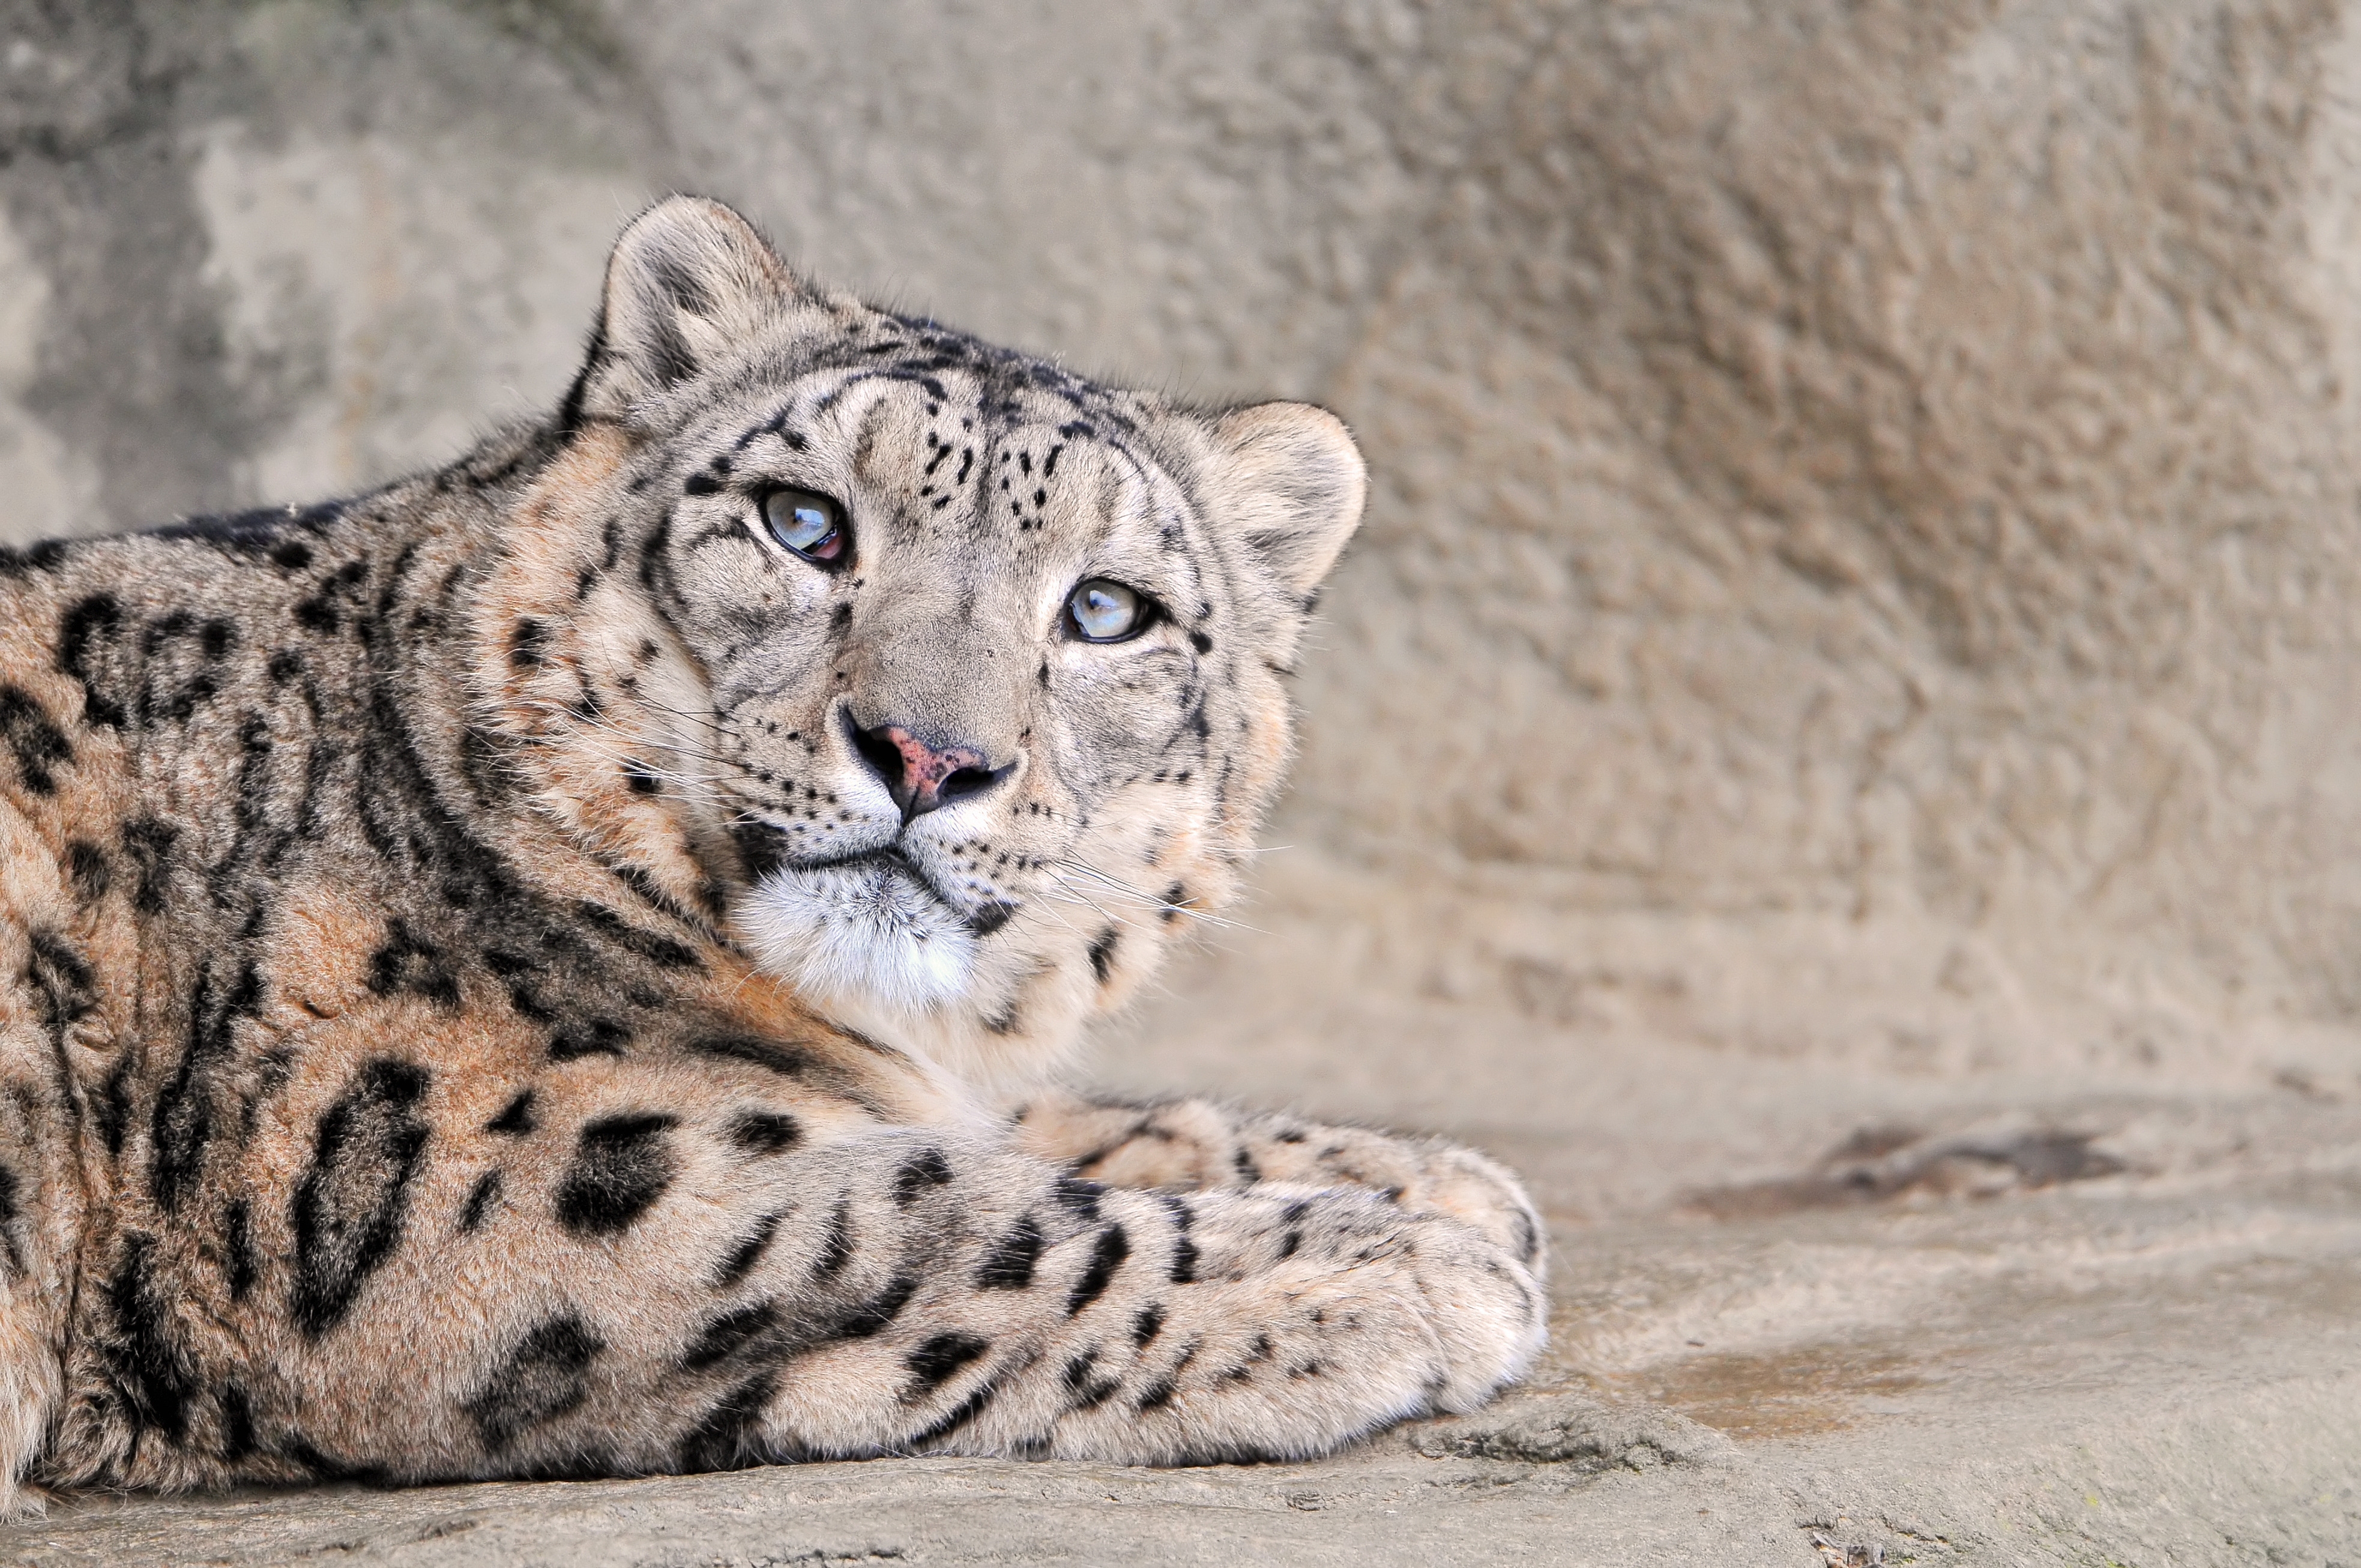 135889 download wallpaper snow leopard, animals, muzzle, spotted, spotty, beautiful, kind screensavers and pictures for free